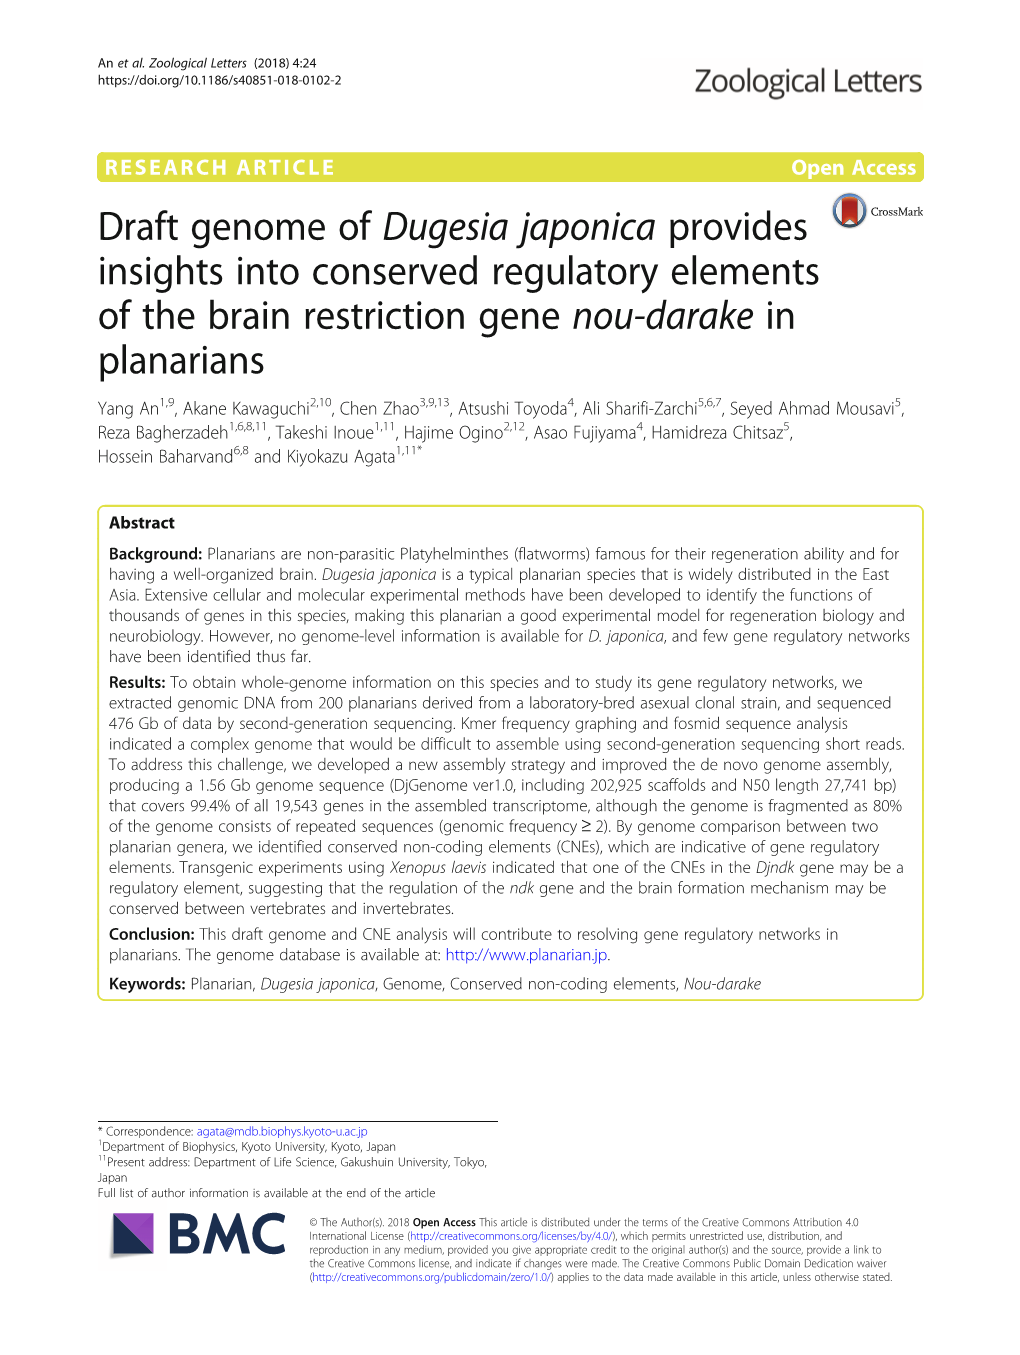 Draft Genome of Dugesia Japonica Provides Insights Into Conserved